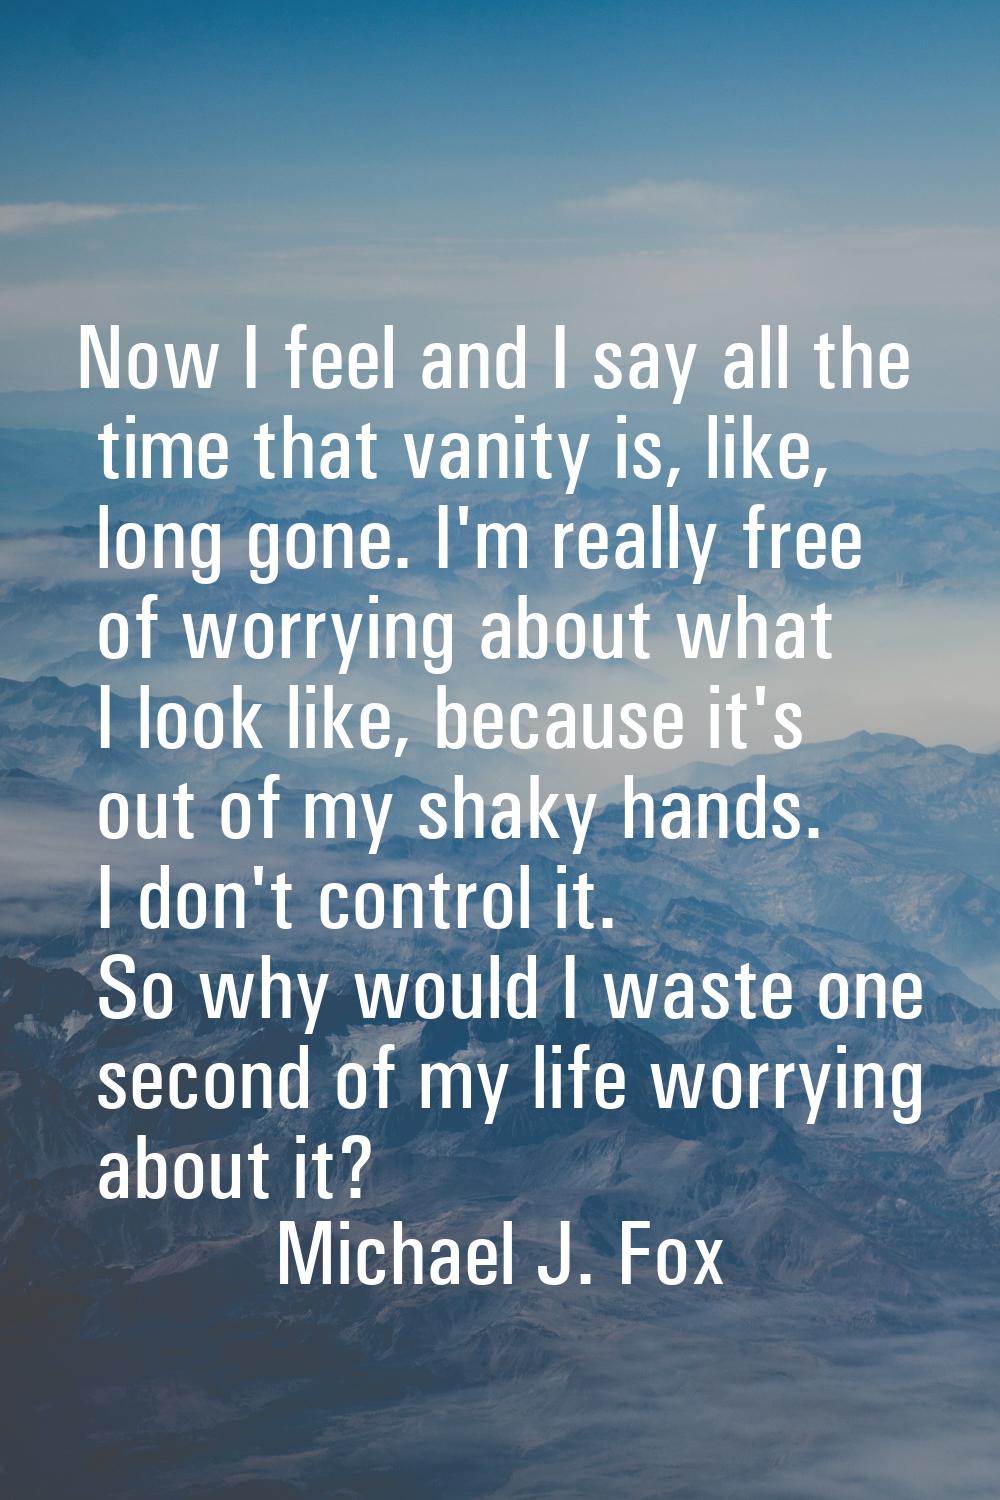 Now I feel and I say all the time that vanity is, like, long gone. I'm really free of worrying abou